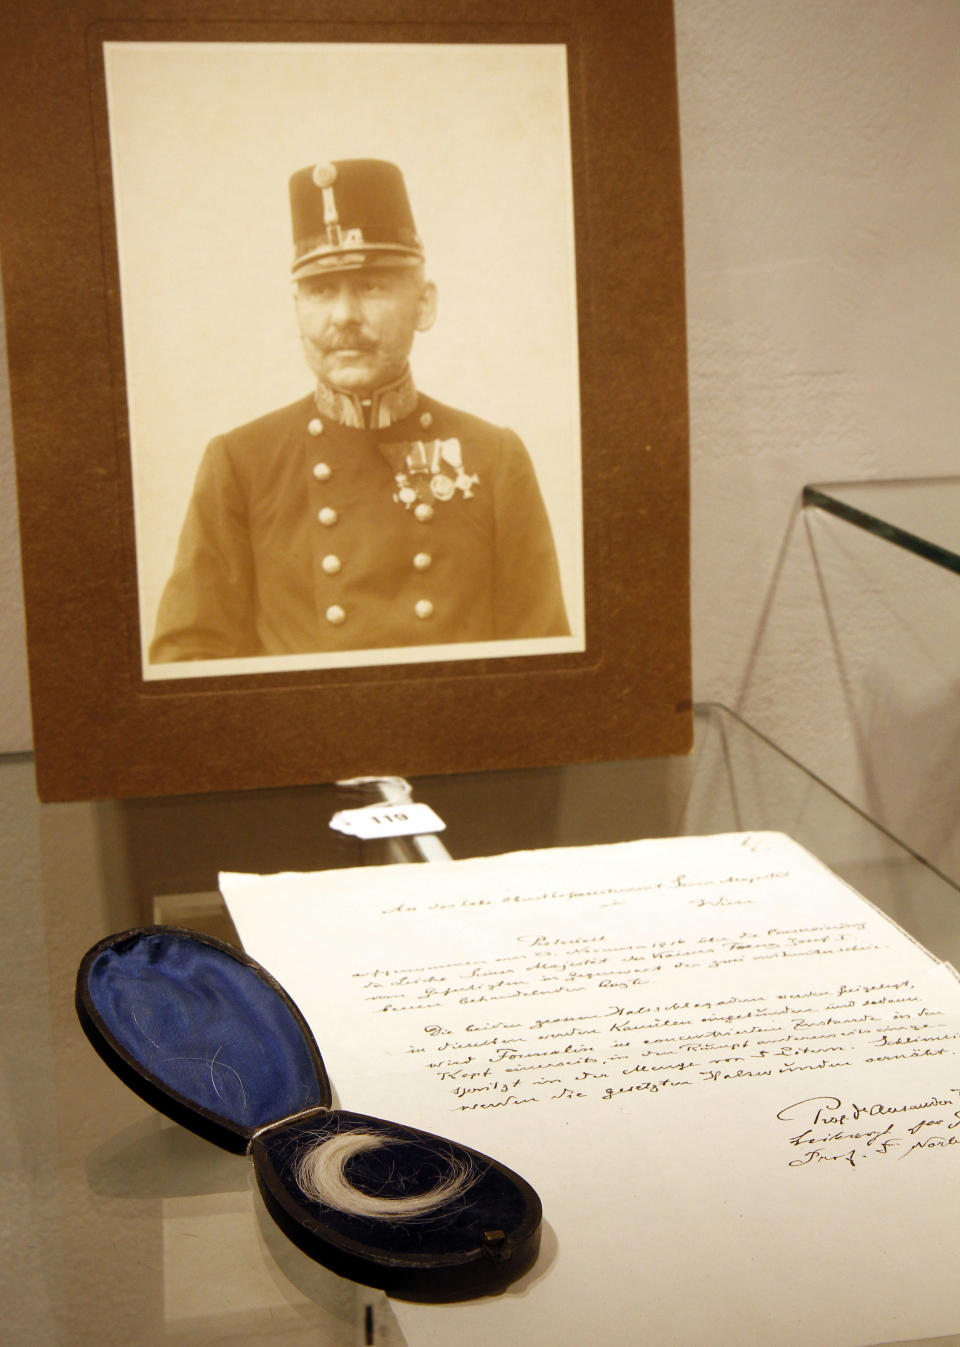 A lock of hair from Austrian Emperor Franz Josef, pictured in background on display, at an auction house, in Vienna, Austria, Thursday, April 25, 2013. Bidders looking for a pair of mended underwear worn by a former emperor came away disappointed Thursday from an auction of Austrian imperial memorabilia. But a lock of his hair was on offer, and went under the hammer for nearly 14,000 euros (around $18,000) , more than 20 times its listed worth. Vienna's prestigious Dorotheum auction house had said Emperor Franz-Josef's linen would be put on the block, suggesting there was a least a chance that one of the parsimonious ruler's patched undergarments would be put on sale. (AP Photo/Ronald Zak)